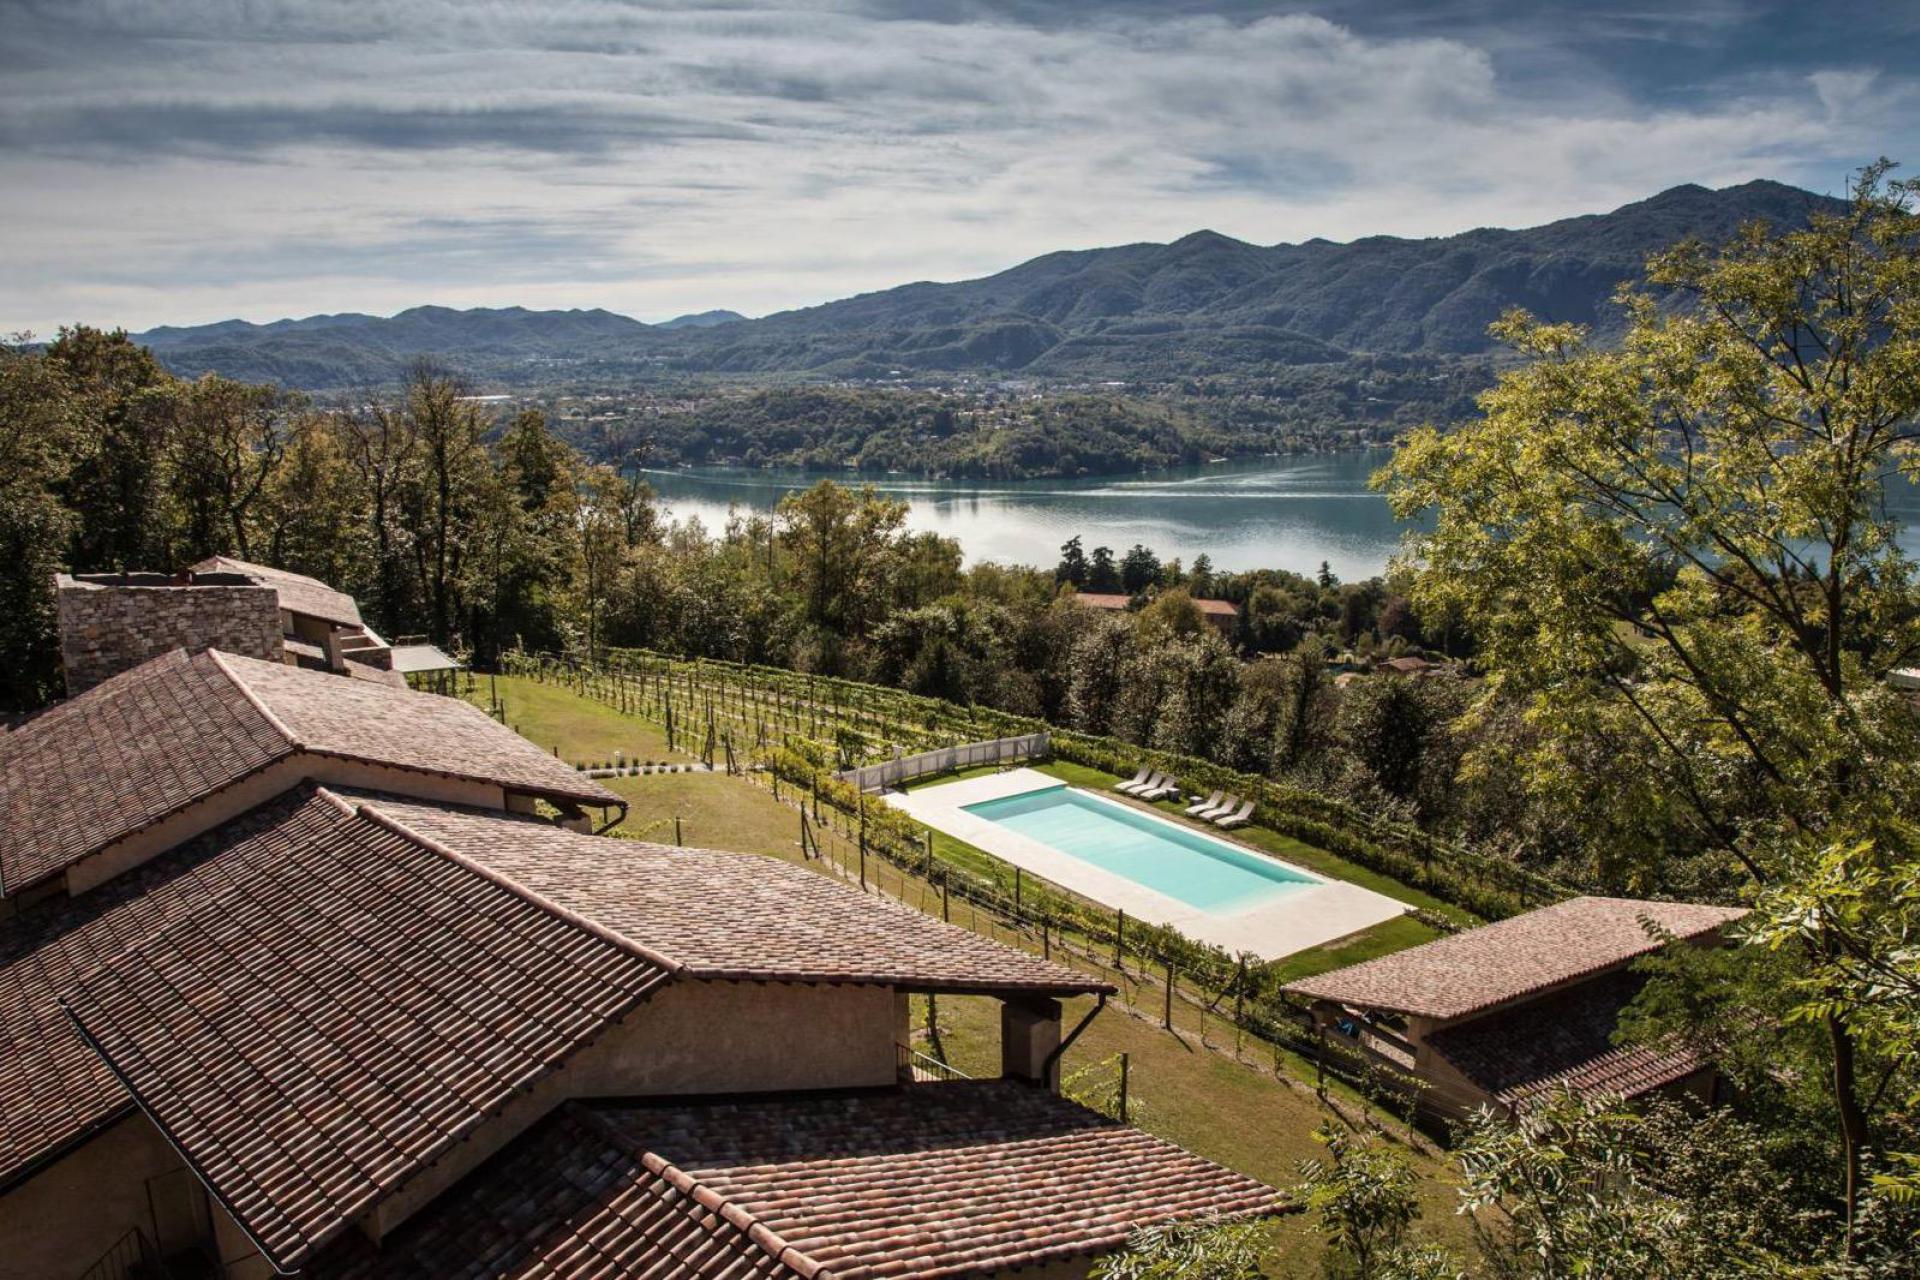 Agriturismo Lake Maggiore with outstanding views